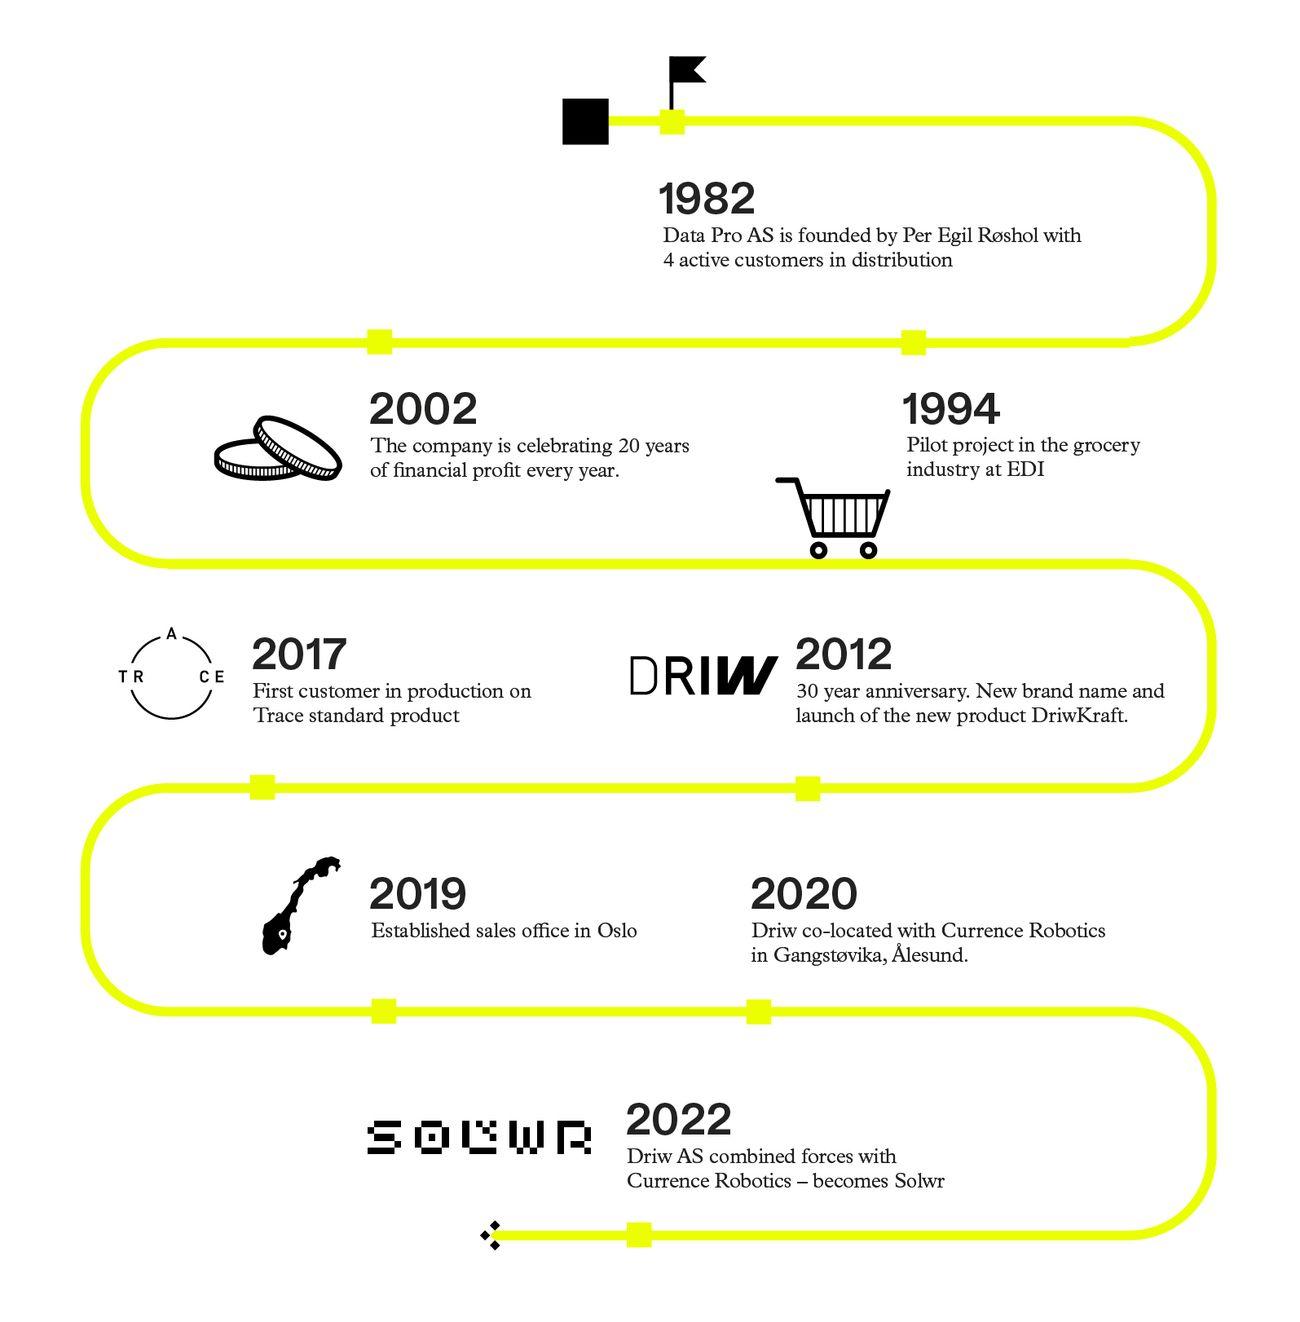 Timeline from Data Pro 1982 to Solwr 2022